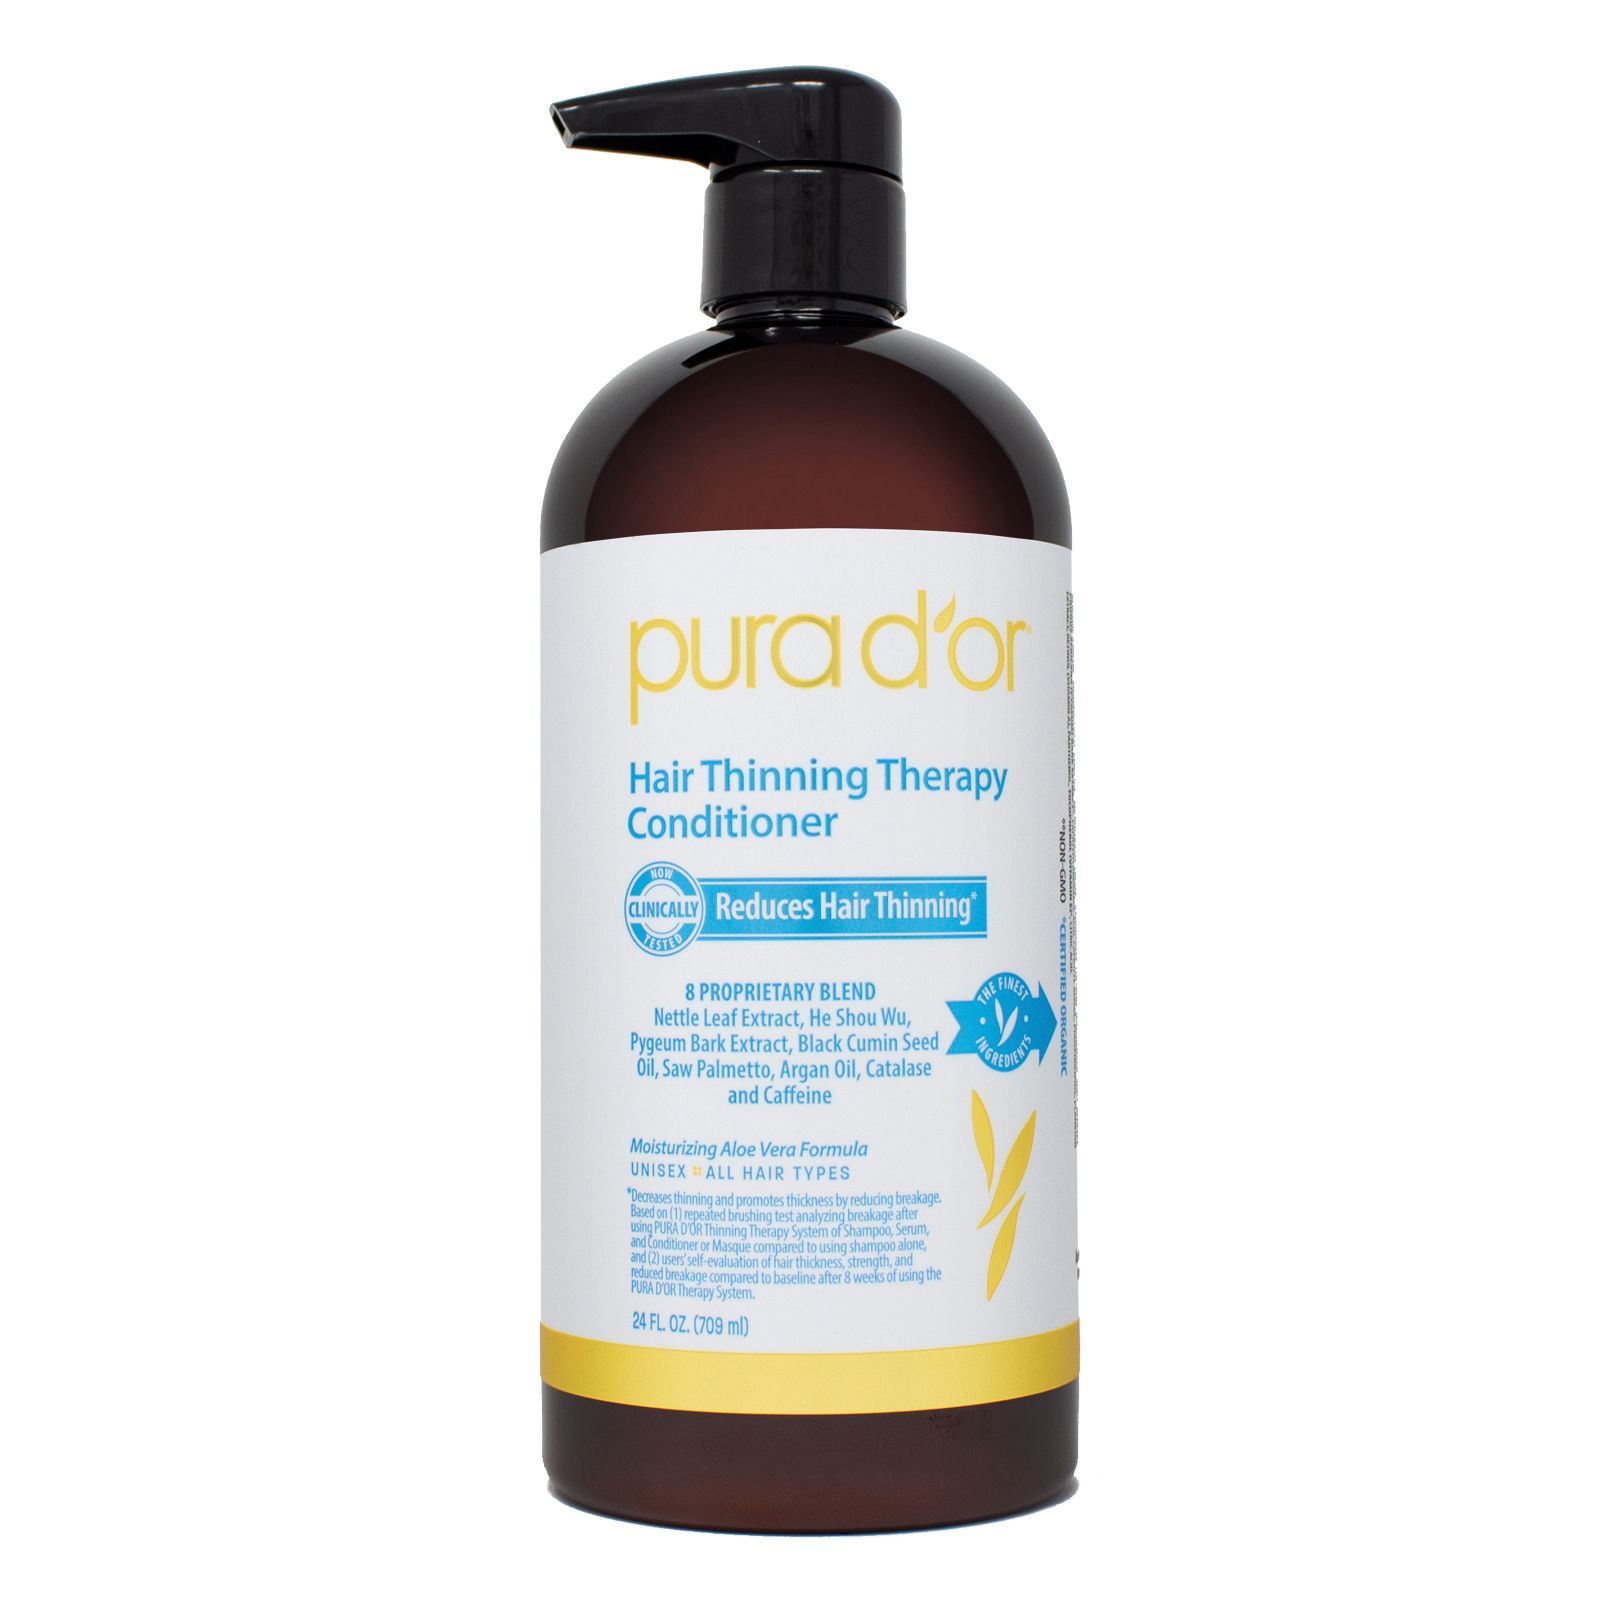 HAIR LOSS SUFFERER TESTS PURA D'OR ANTI THINNING THERAPY SHAMPOO 8